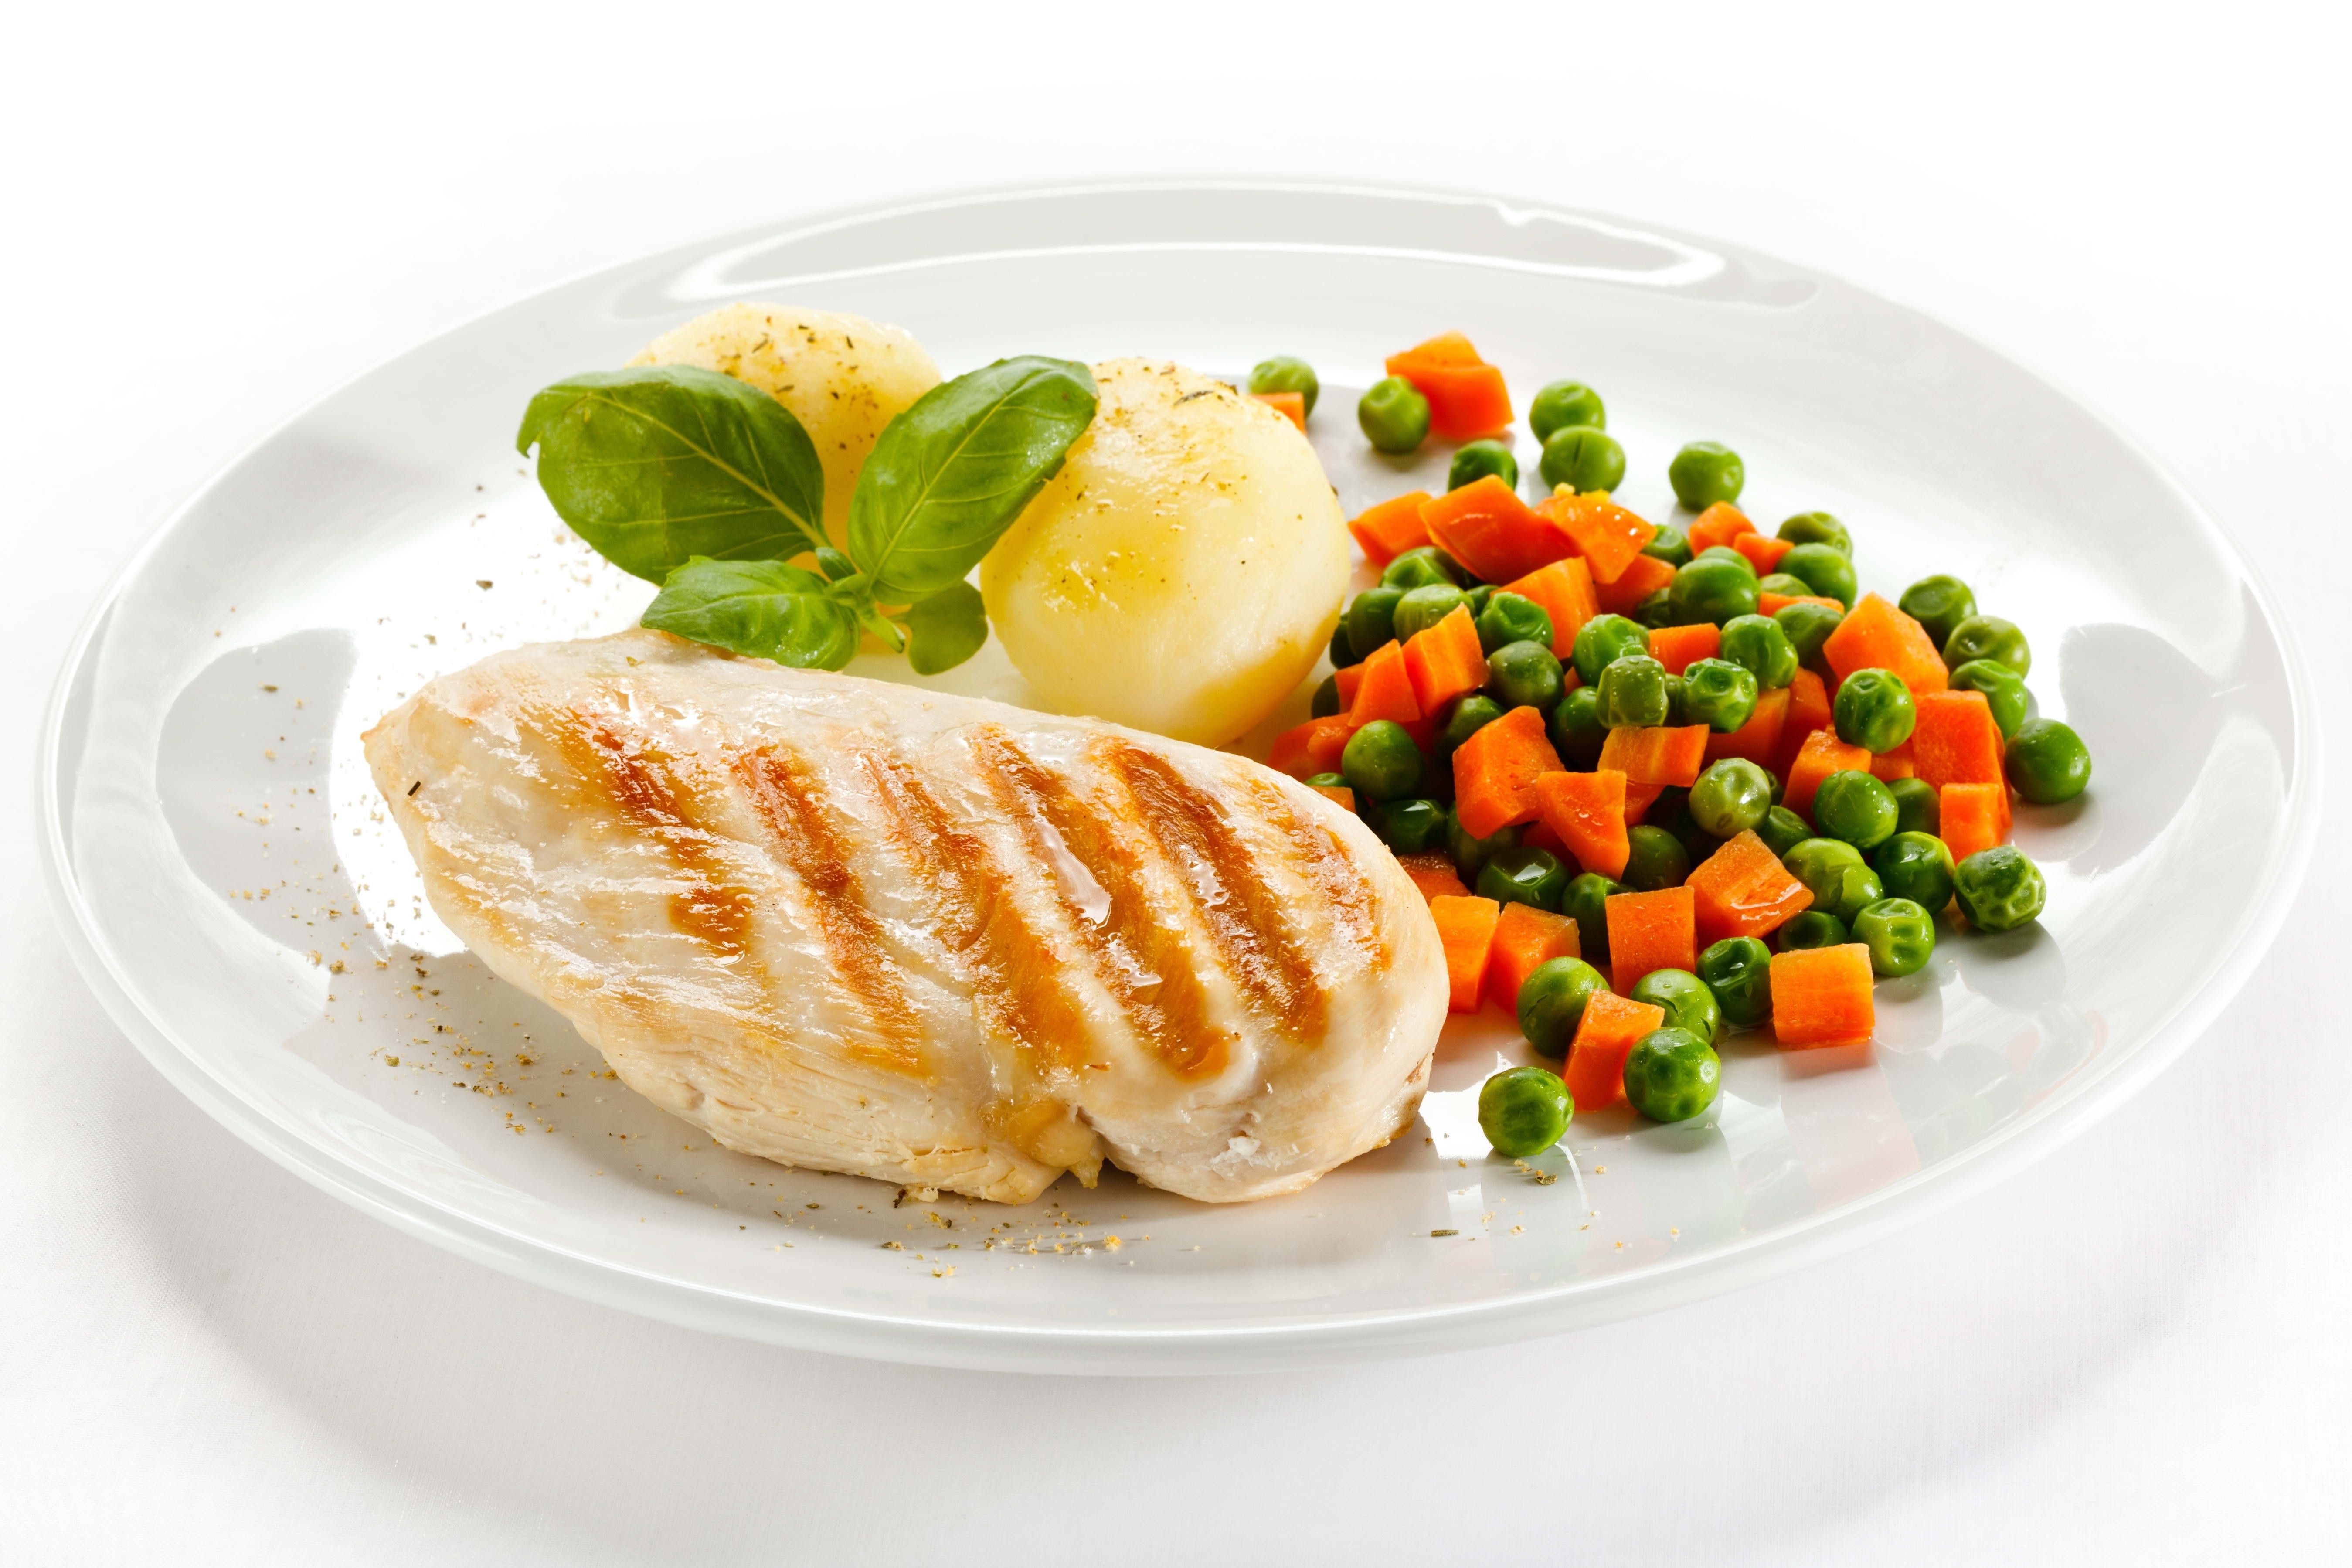 Chicken, Meat, Potatoes, Peas, plate, White background wallpaper